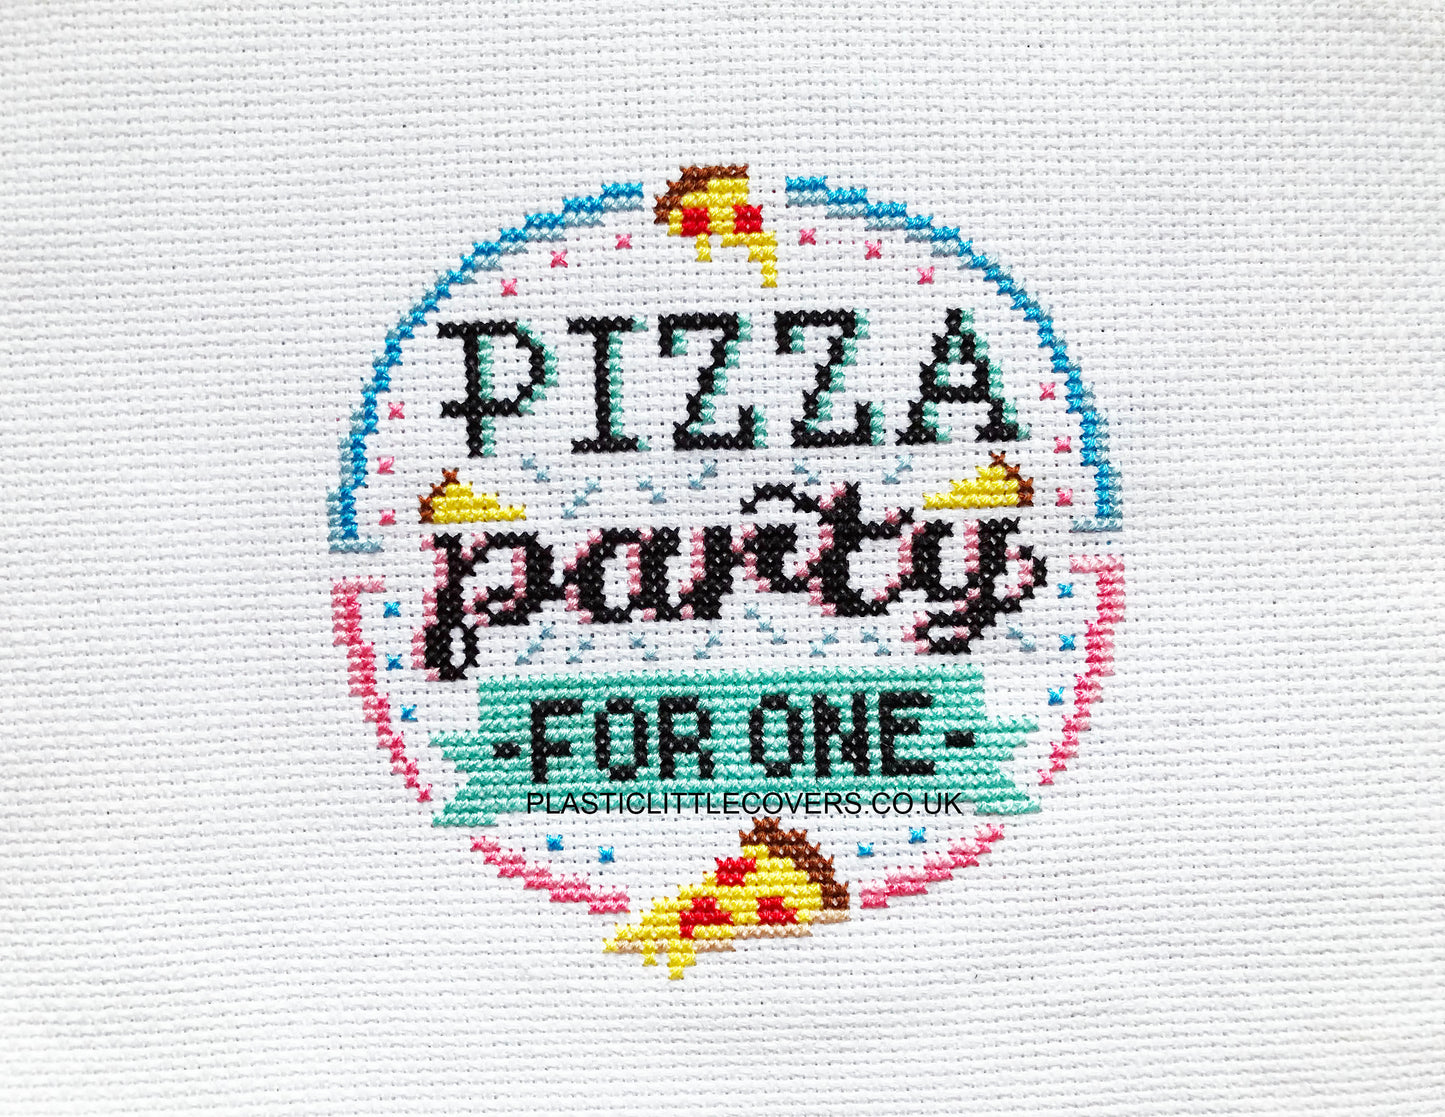 Pizza Party For One - Cross Stitch Pattern PDF.